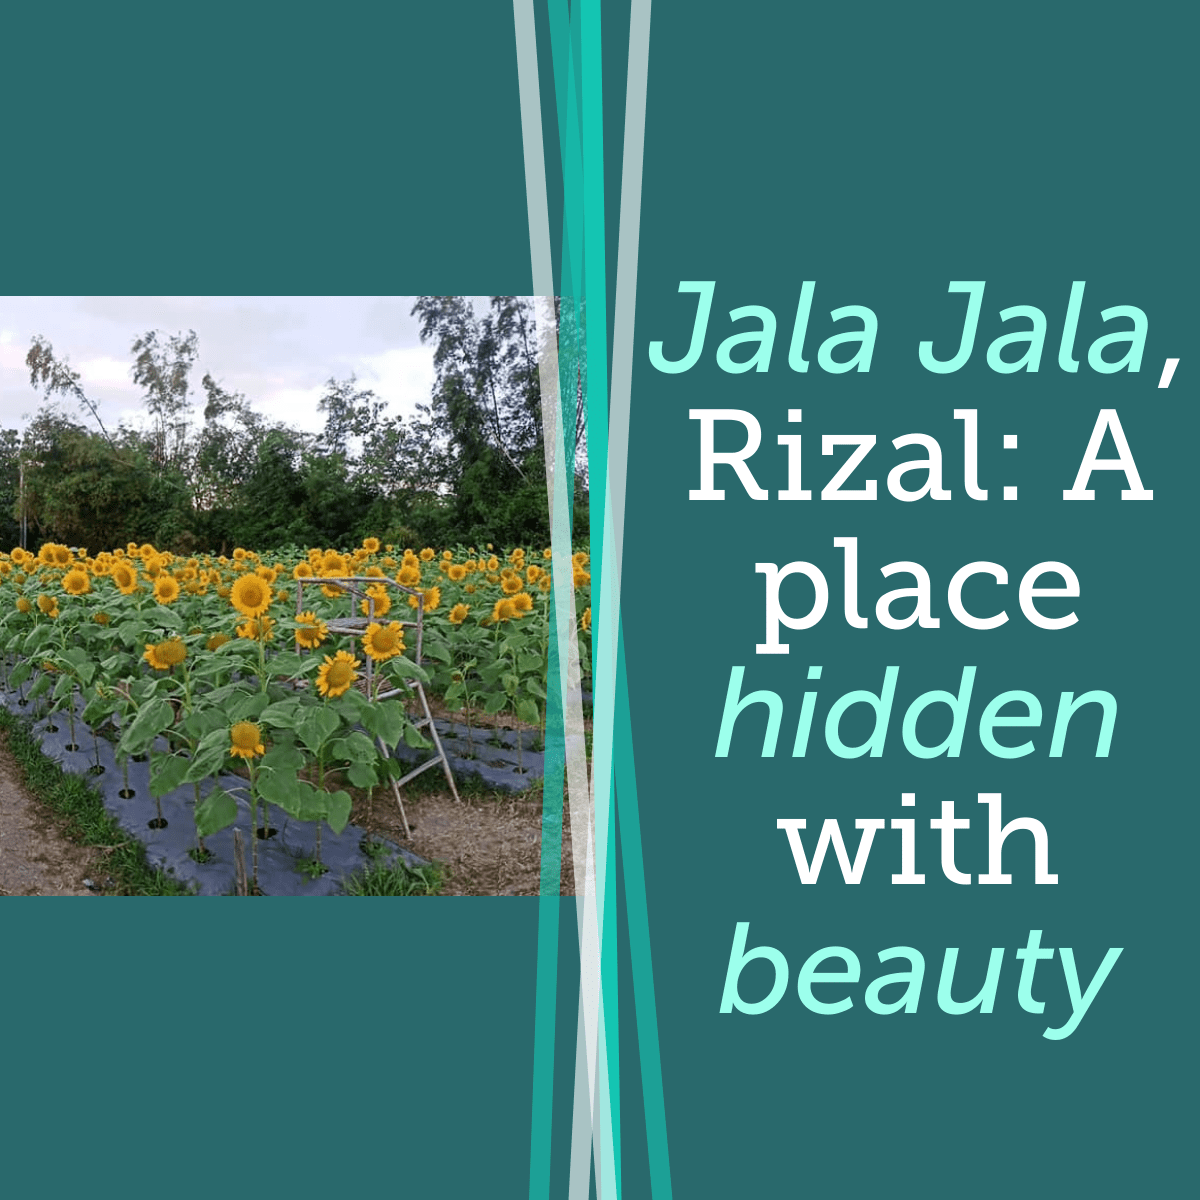 A hidden place of beauty in Jala Jala, Rizal in the Philippines.